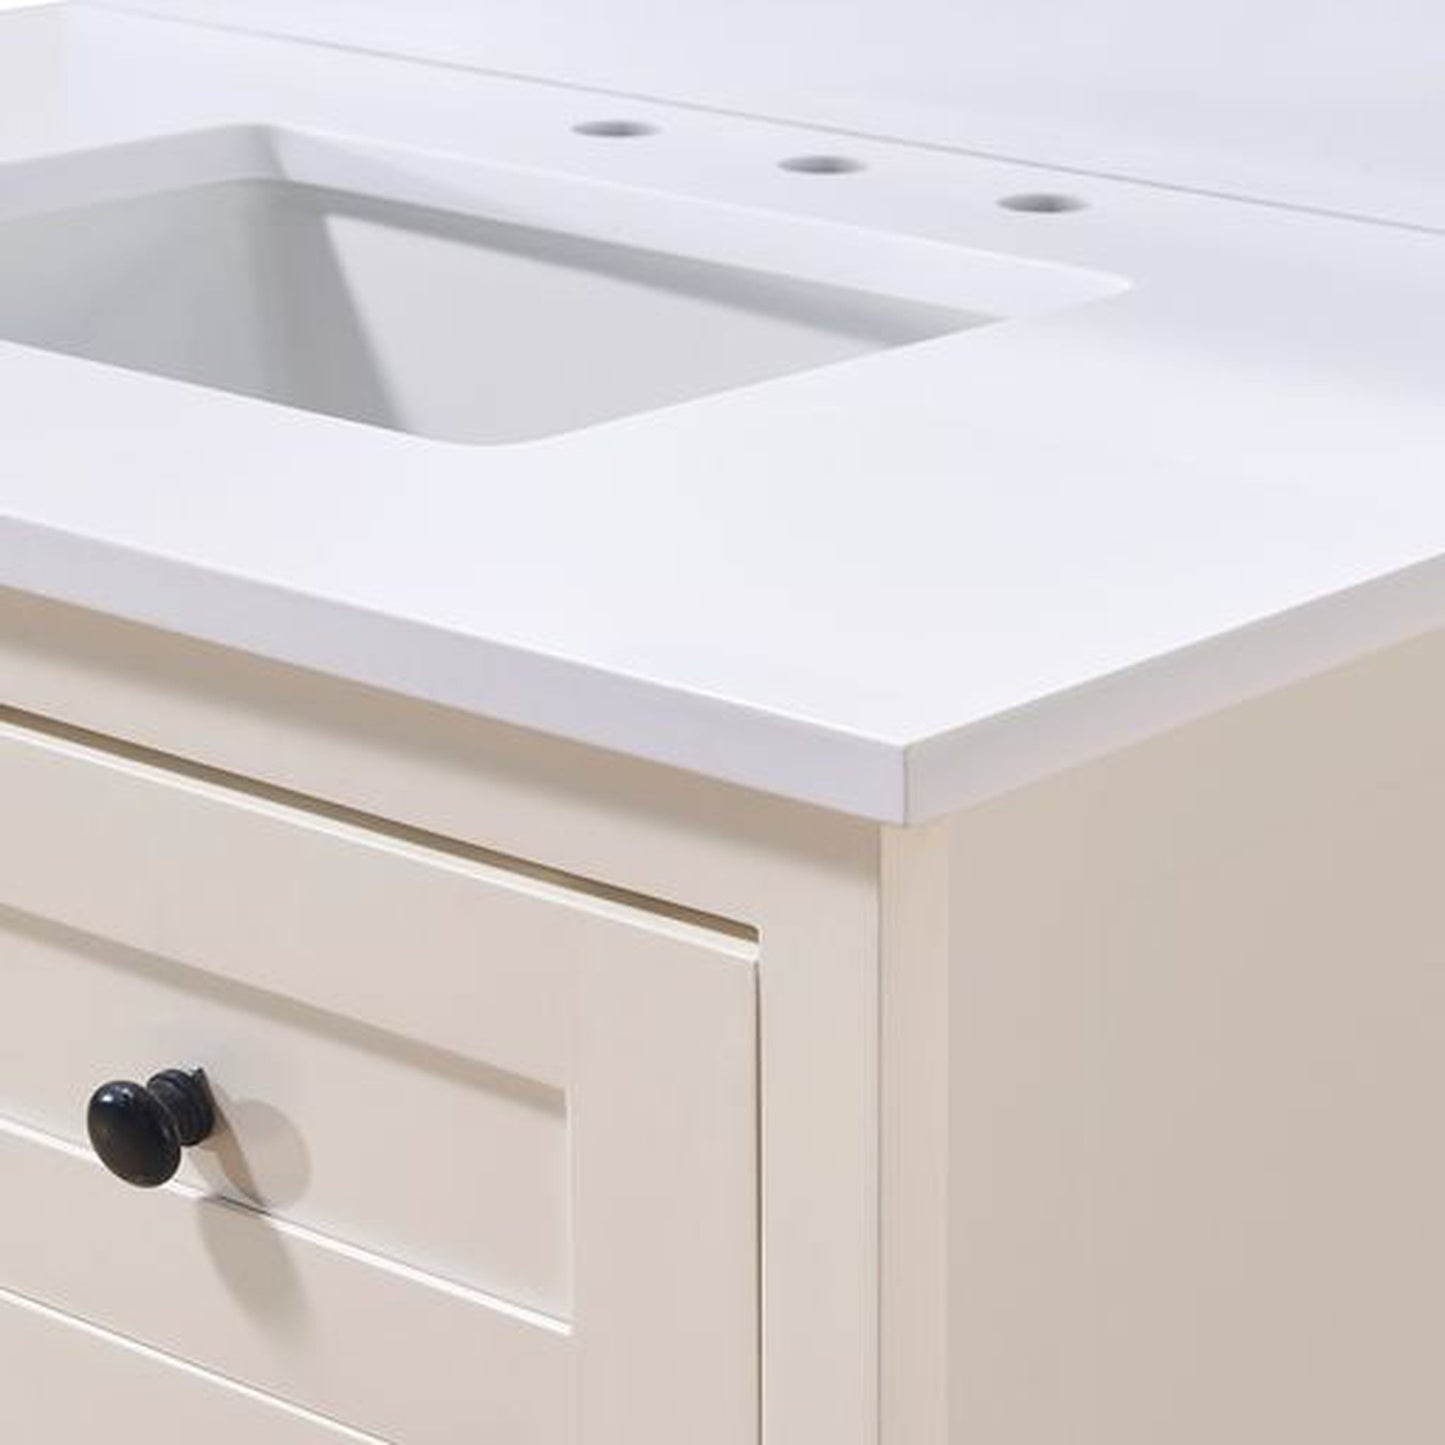 Altair Andalo 37" x 22" Snow White Composite Stone Bathroom Vanity Top With White SInk